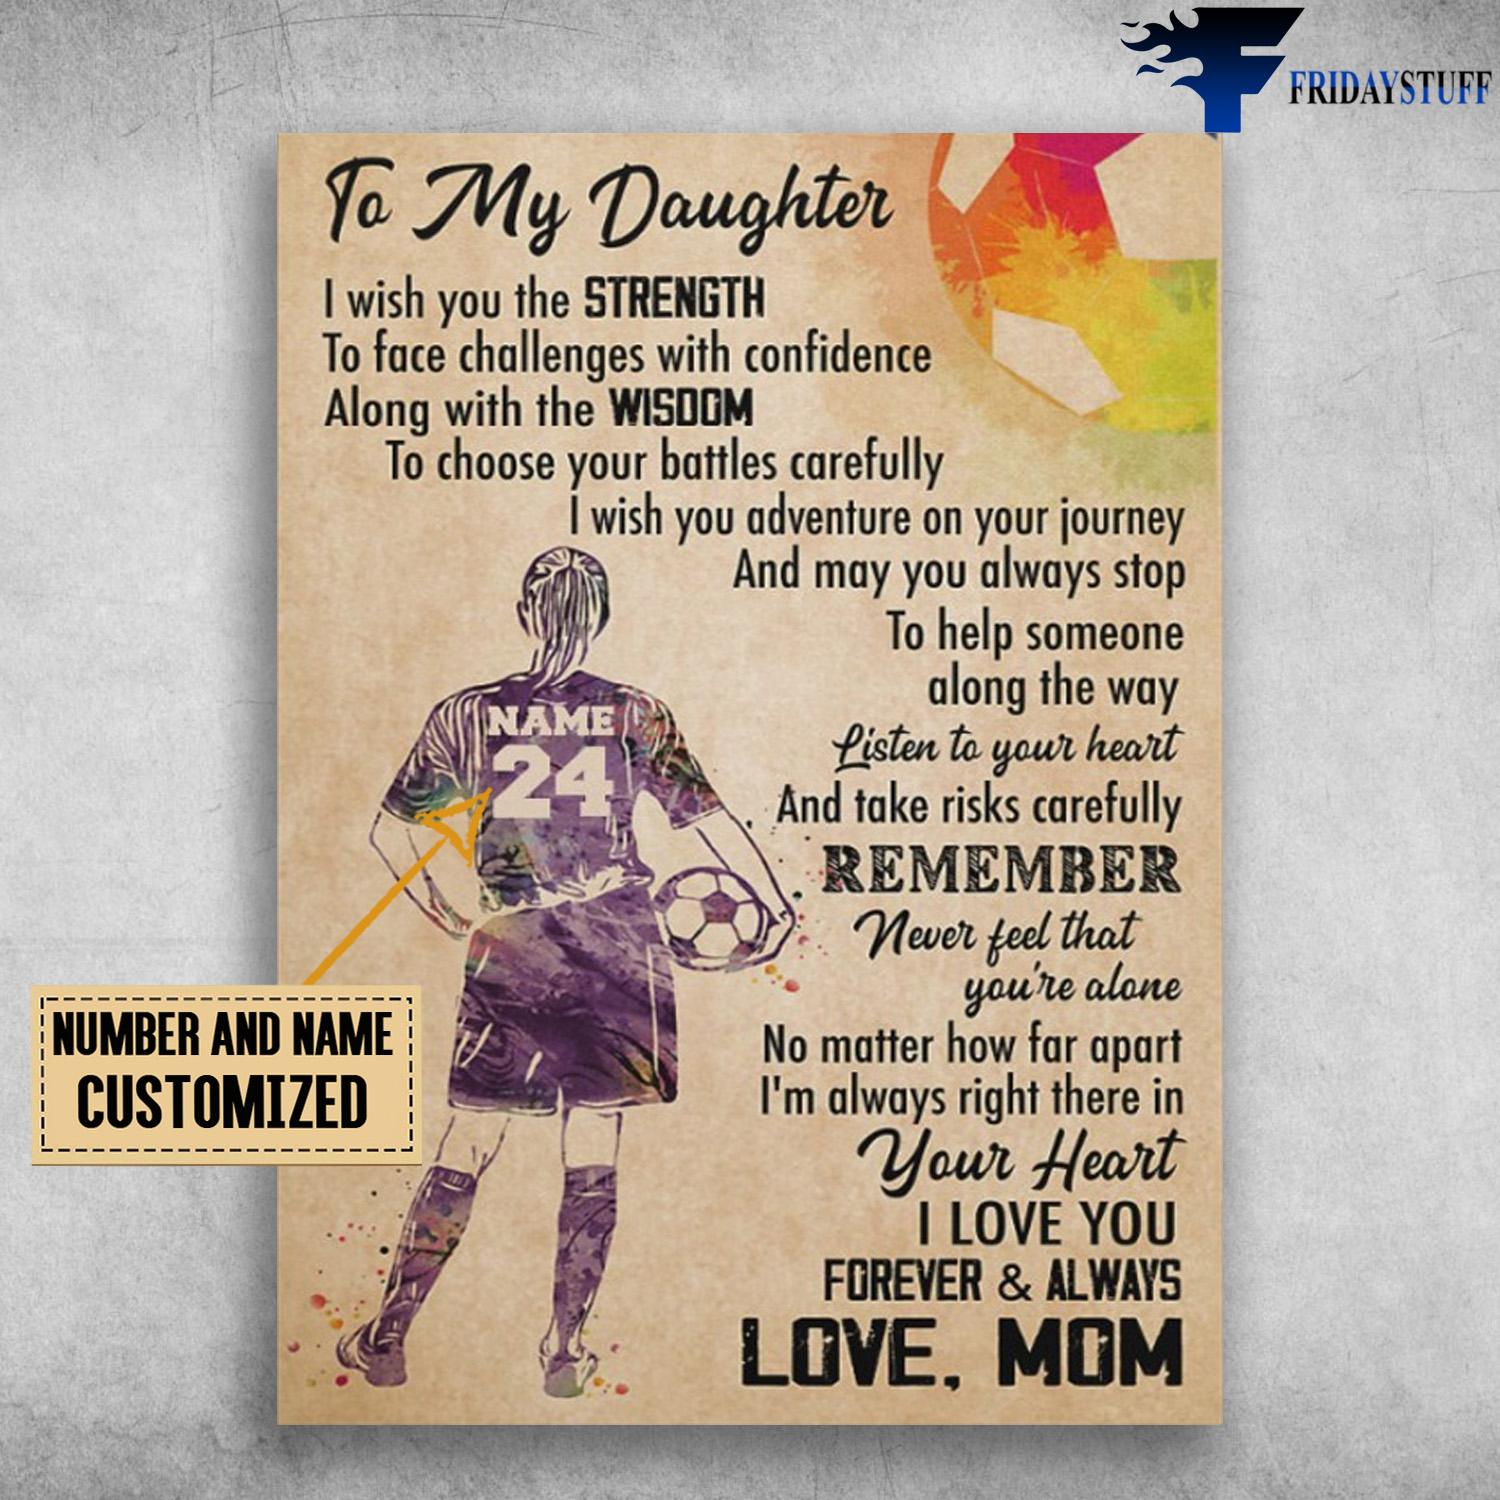 Soccer Daughter, Mom And Daughter, To My Daughter, I Wish You The Strength, To Face Challenges With Confidence, A Long With The Wisdom, To Choose Your Battles Carefully